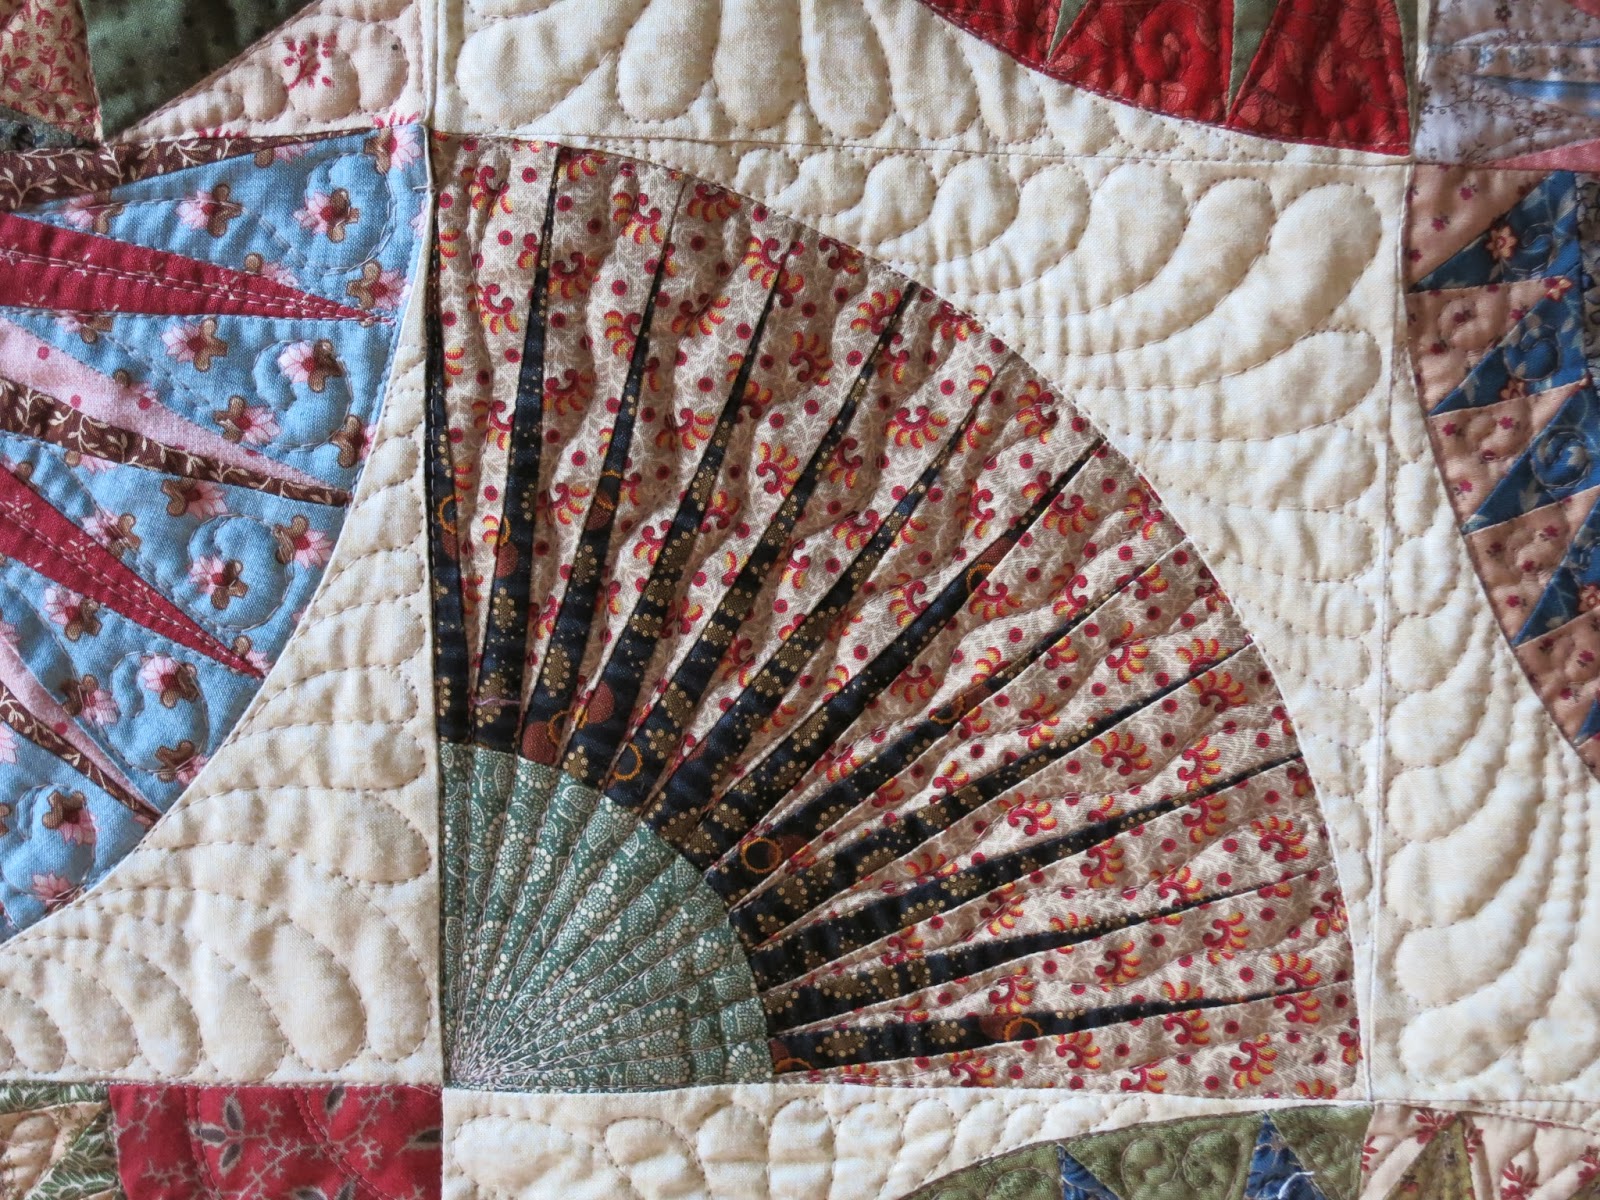 Katrina's Quilting: Ann Mulvany - beautiful quilt